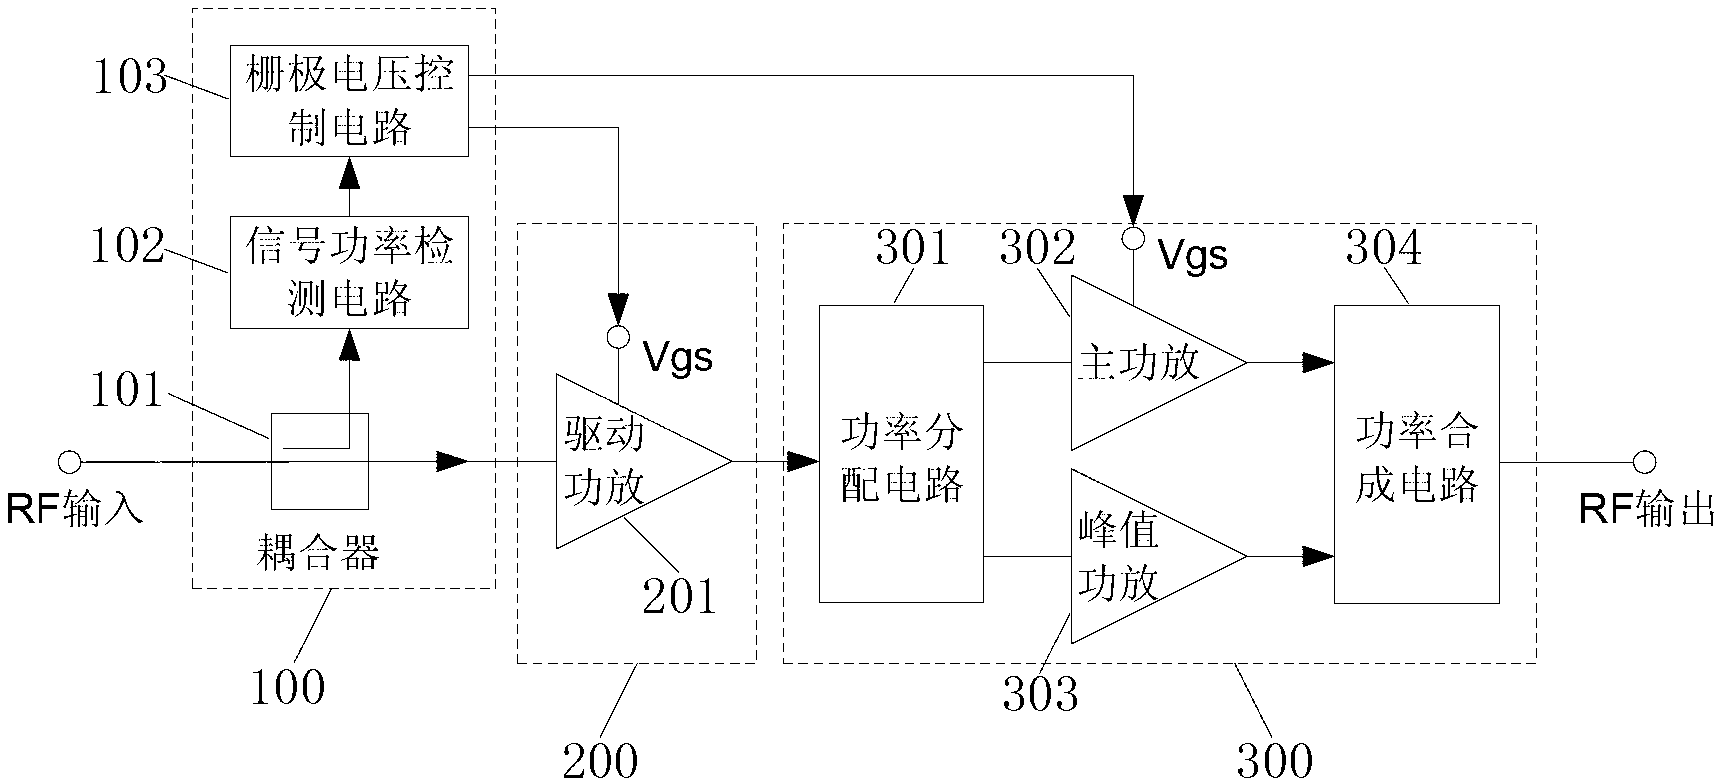 Radio frequency power amplification device